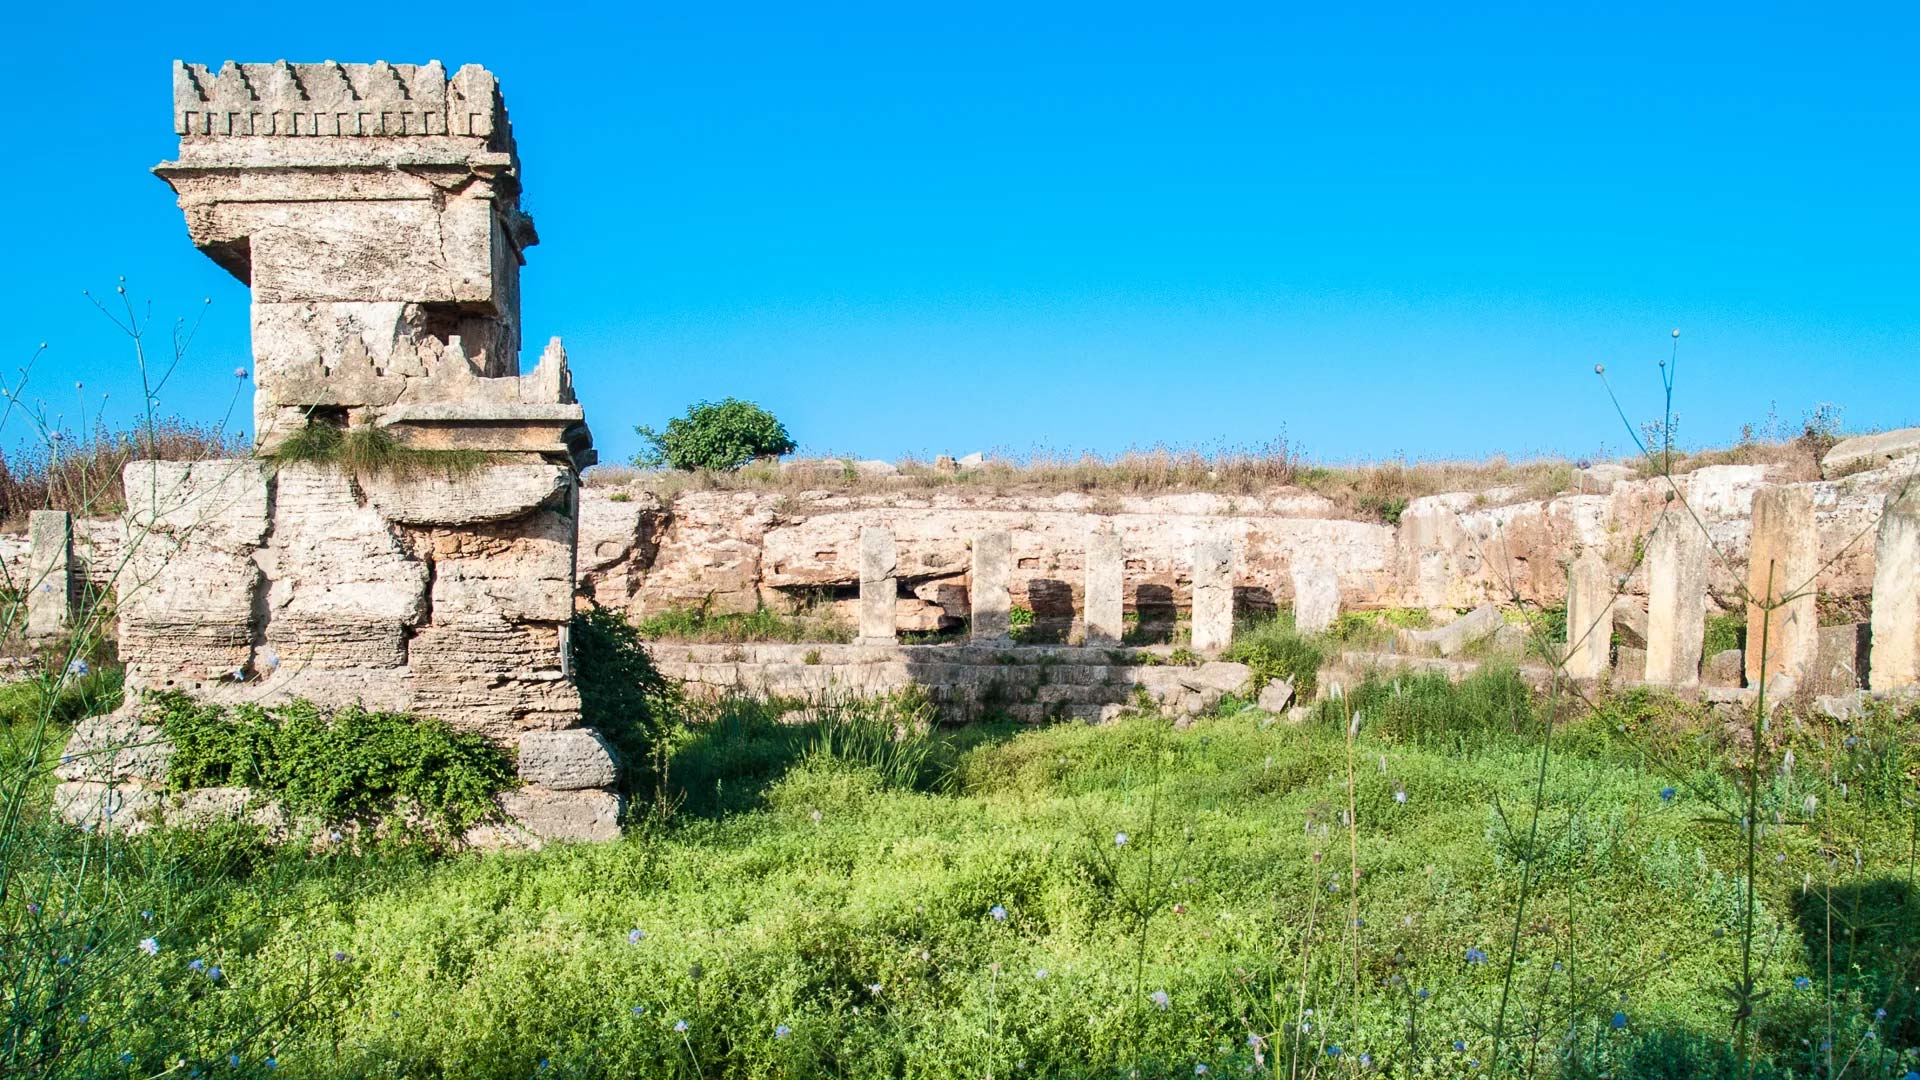 A panoramic photograph reveals the archaeological site of Amrit, embraced by abundant greenery and framed by the serene blue sky in the background.